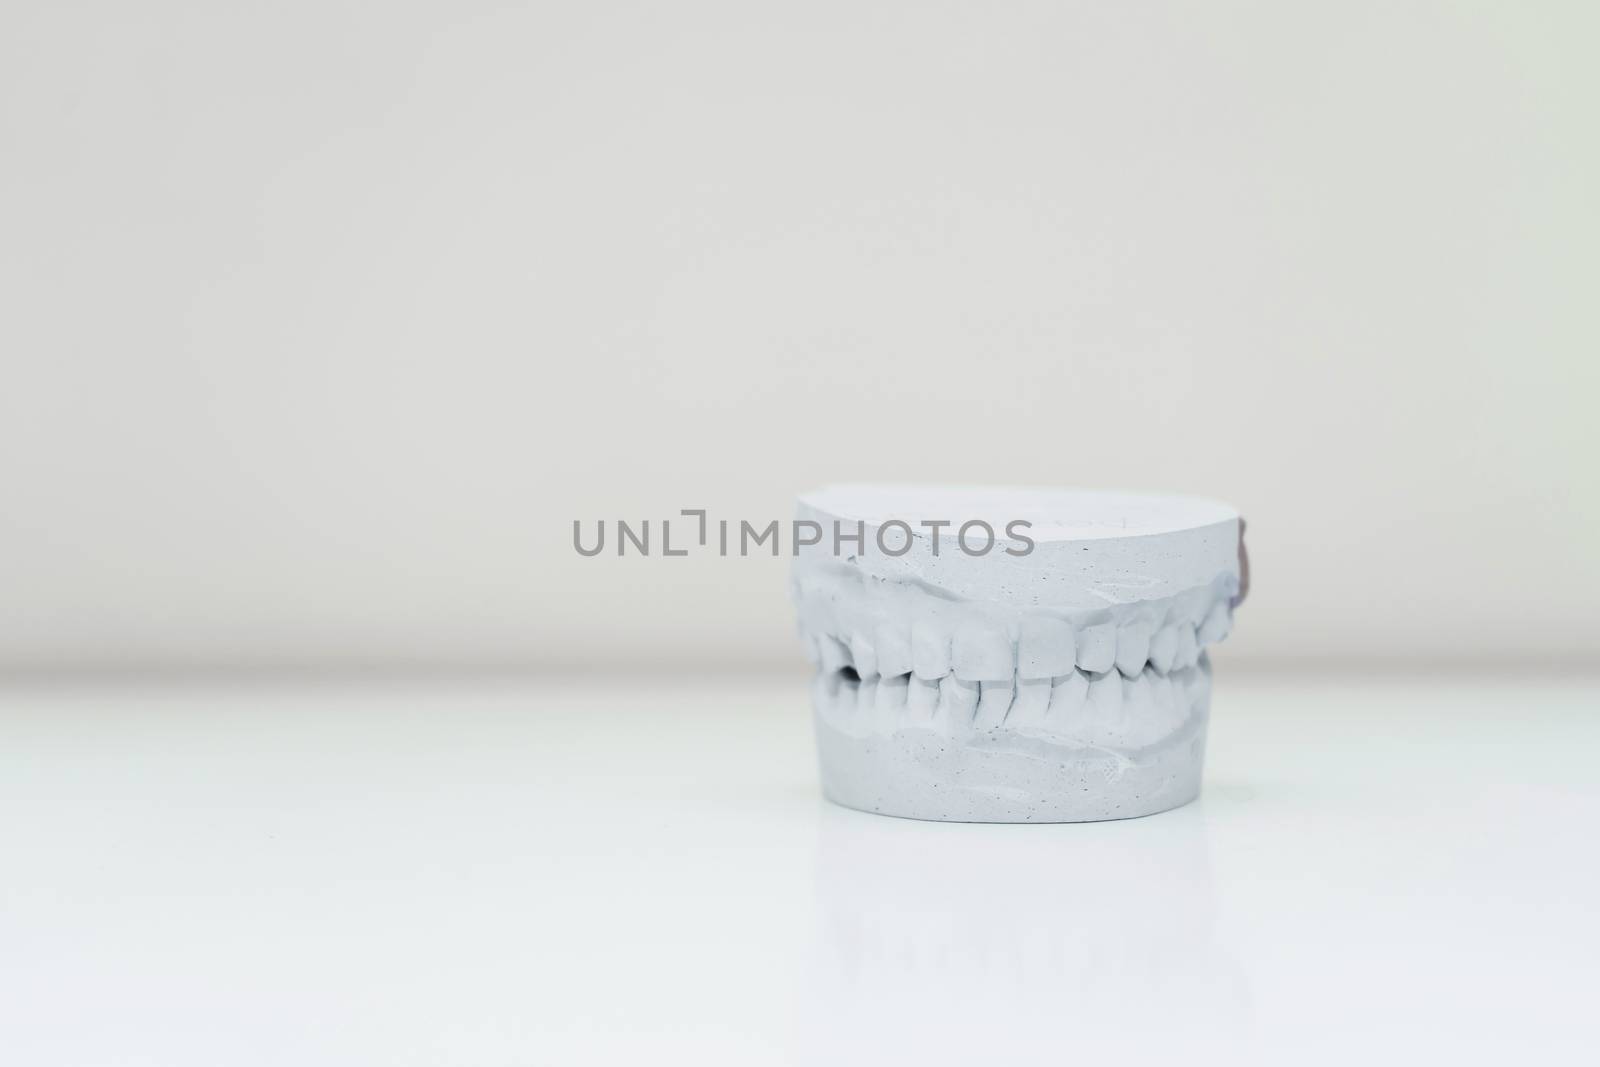 plaster cast of the jaw on a table in a bright room.